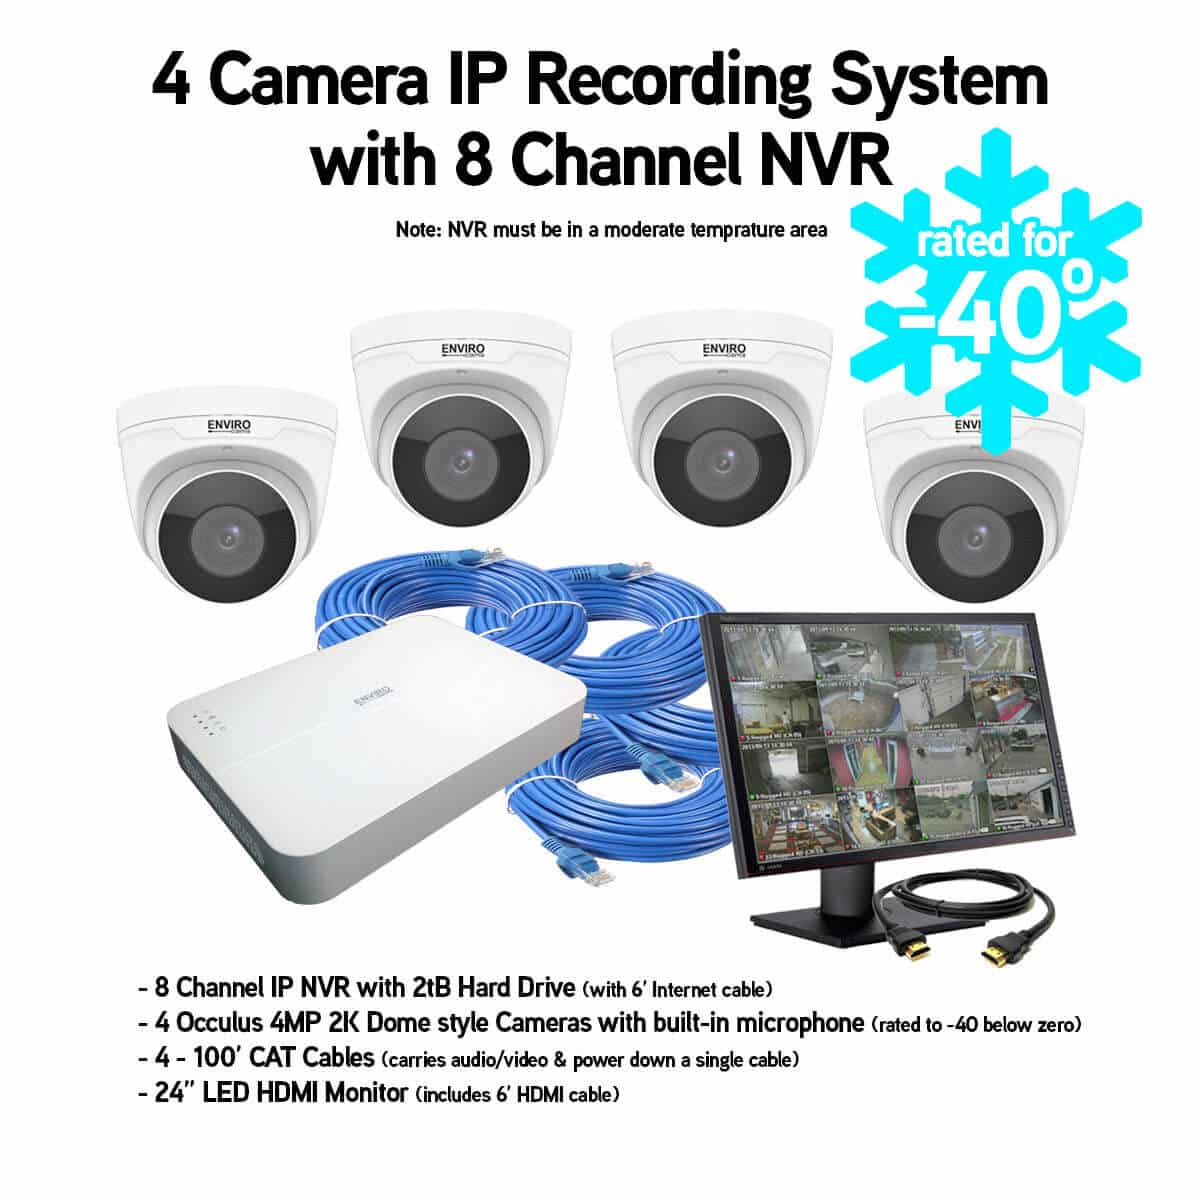 4 Channel IP Camera Recording System (Rated for -40